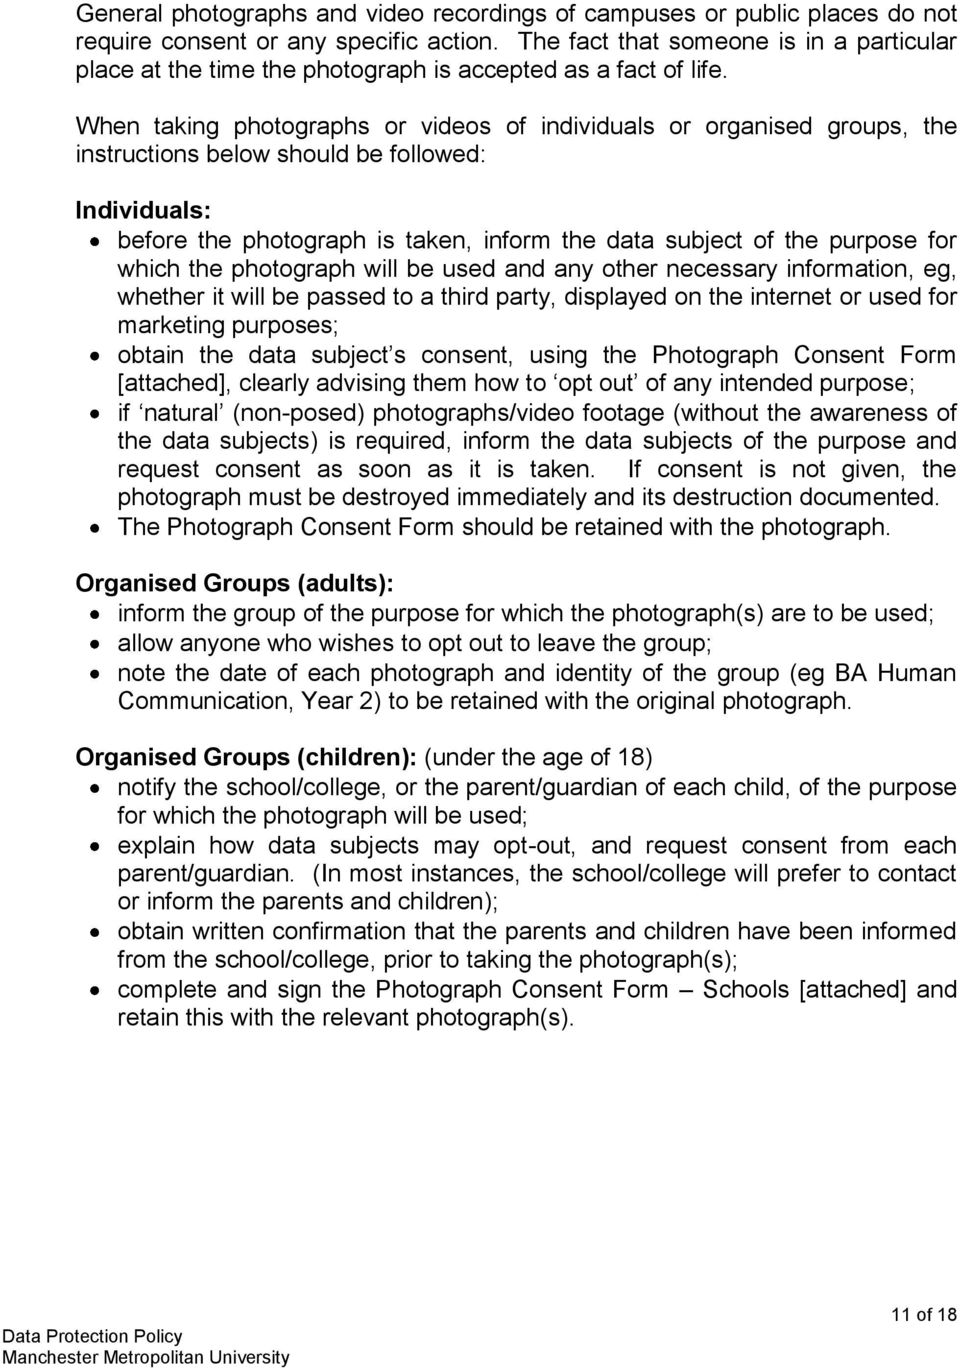 When taking photographs or videos of individuals or organised groups, the instructions below should be followed: Individuals: before the photograph is taken, inform the data subject of the purpose